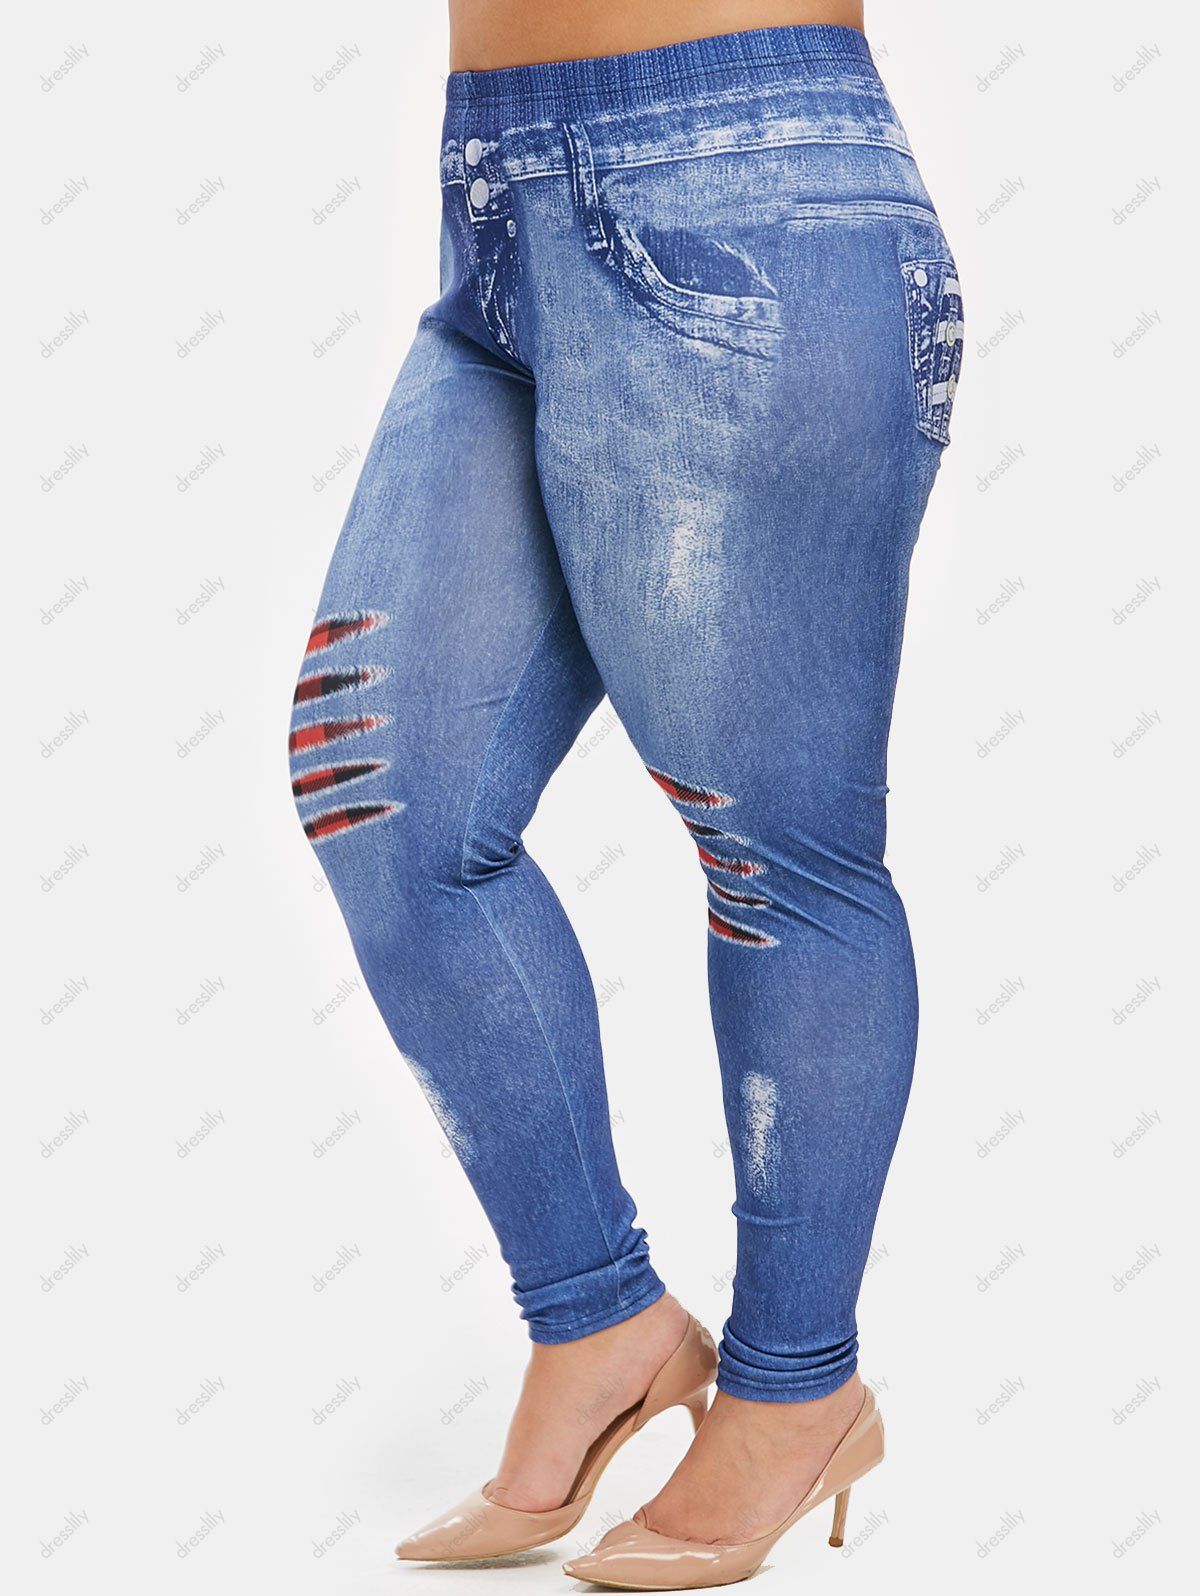 Stretch Blue Jean Leggings  International Society of Precision Agriculture